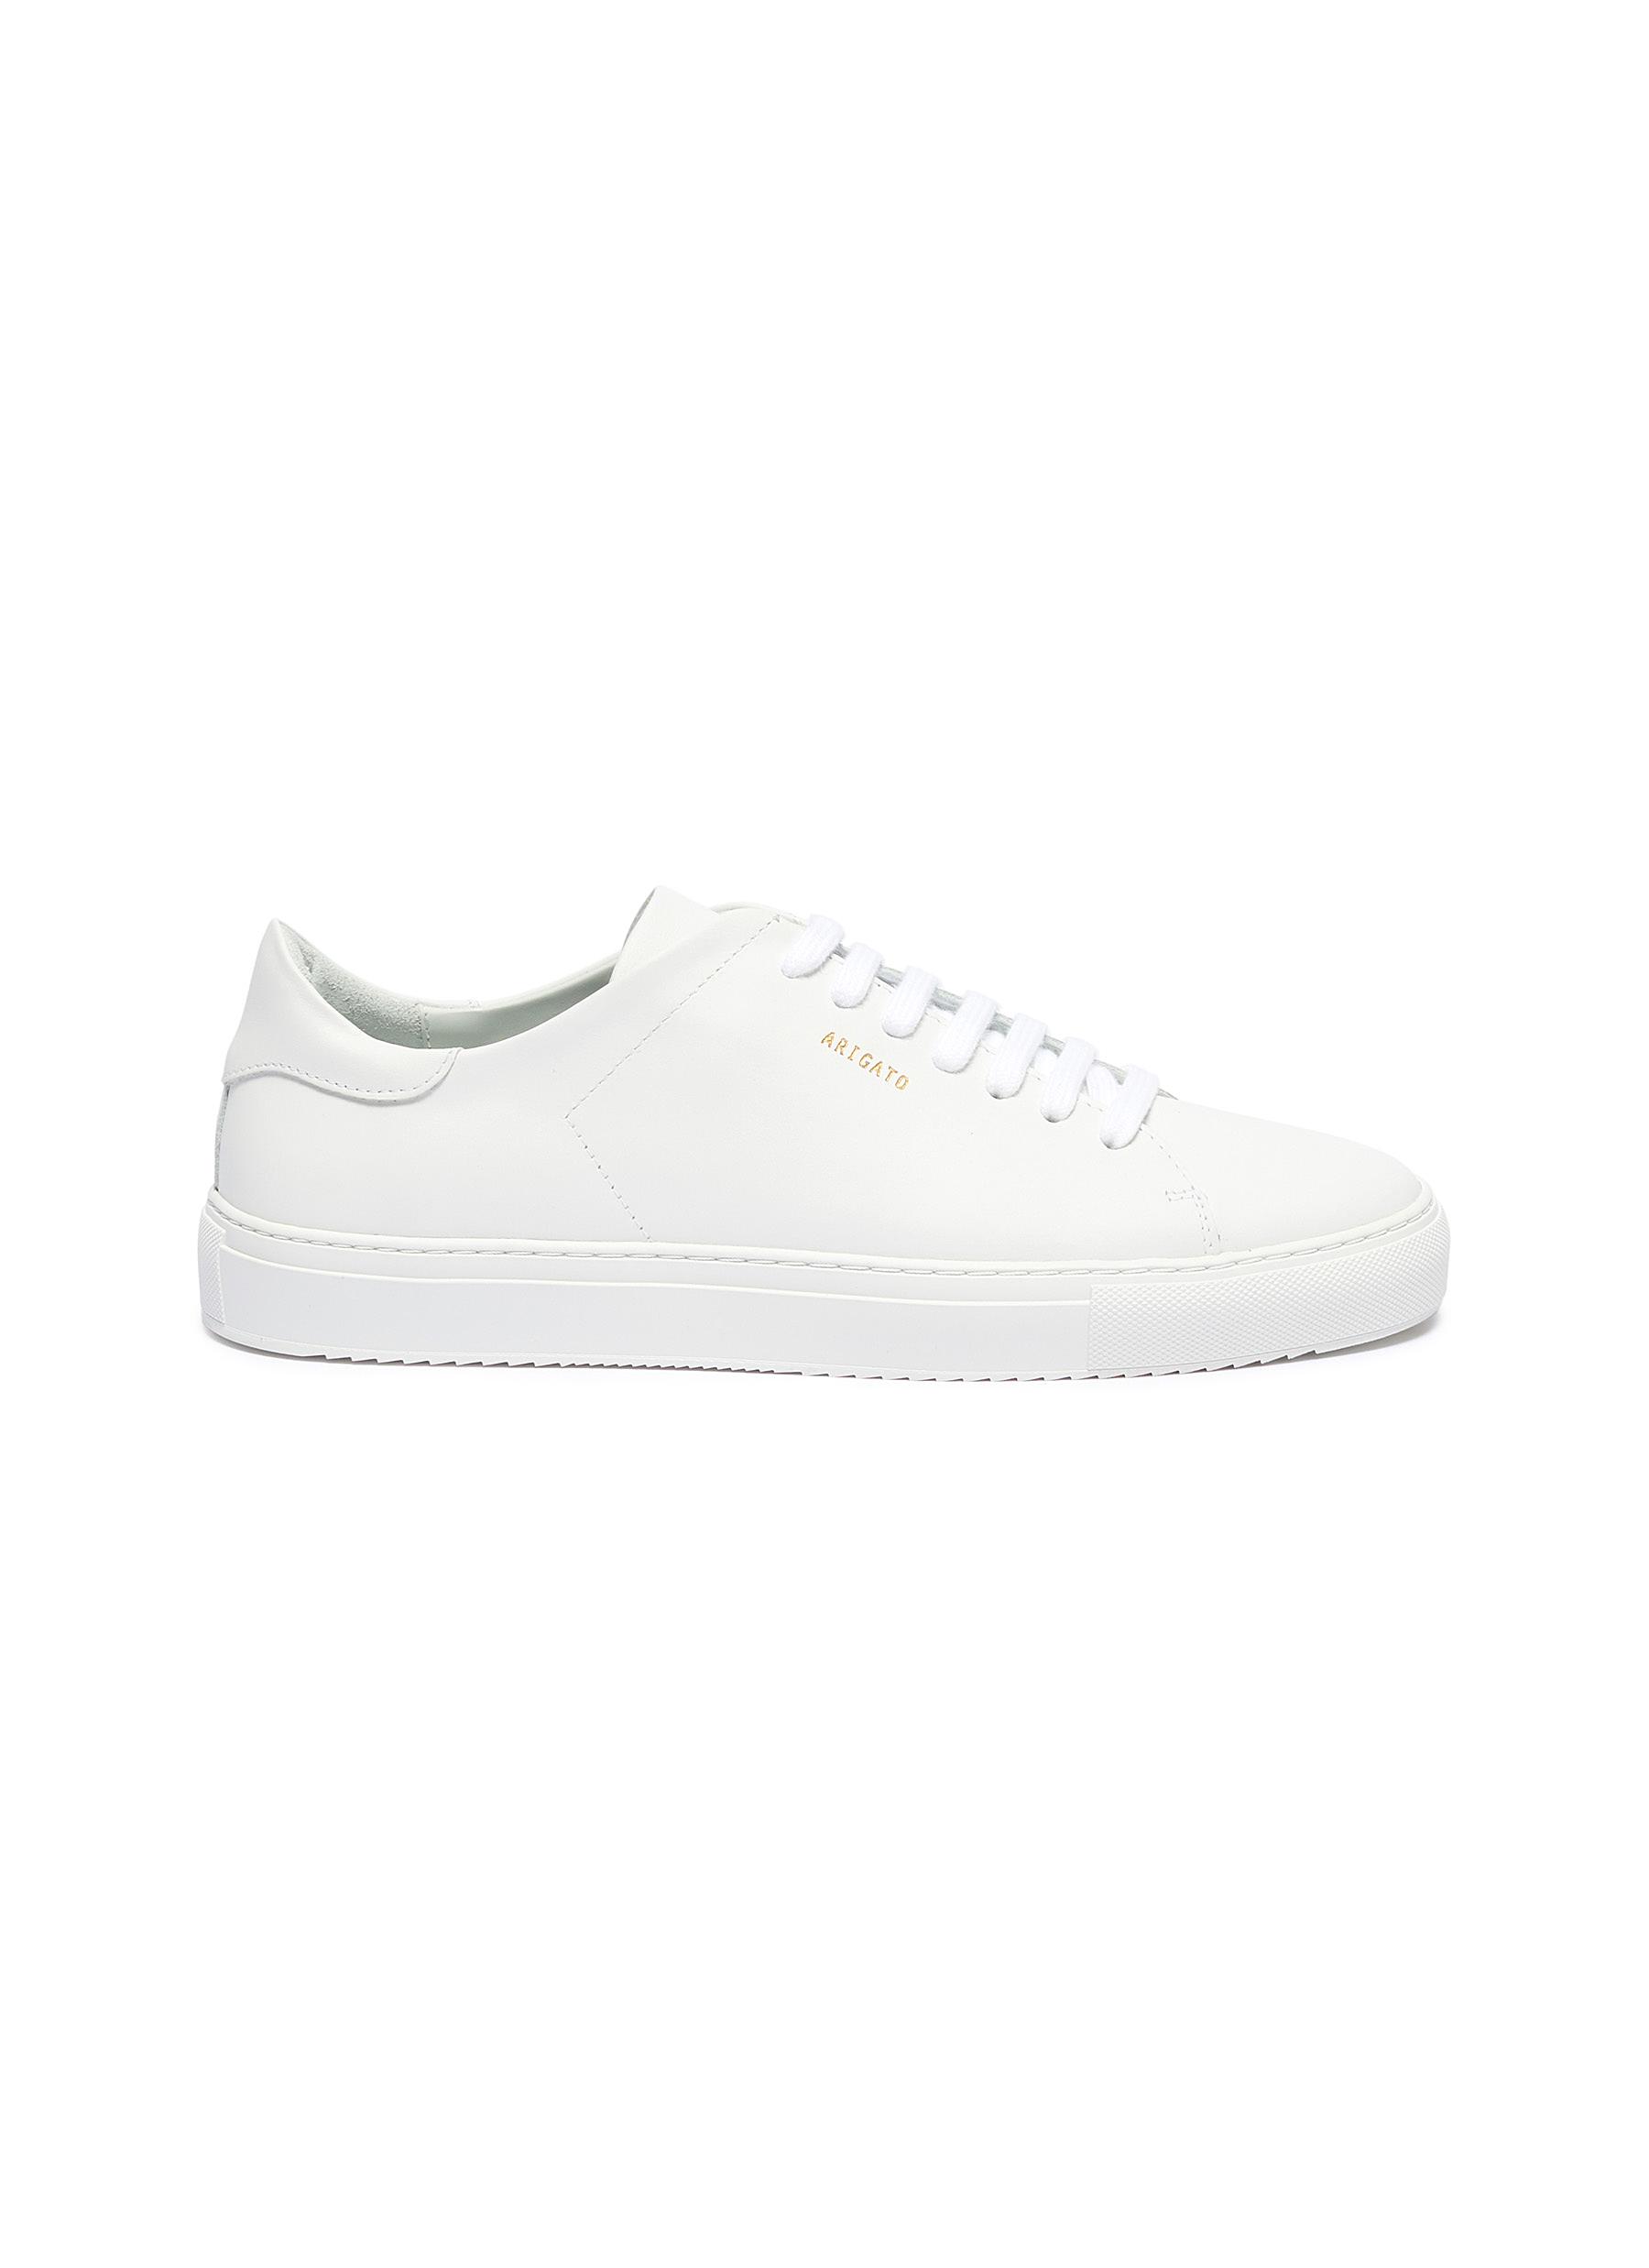 AXEL ARIGATO 'Clean 90' leather sneakers